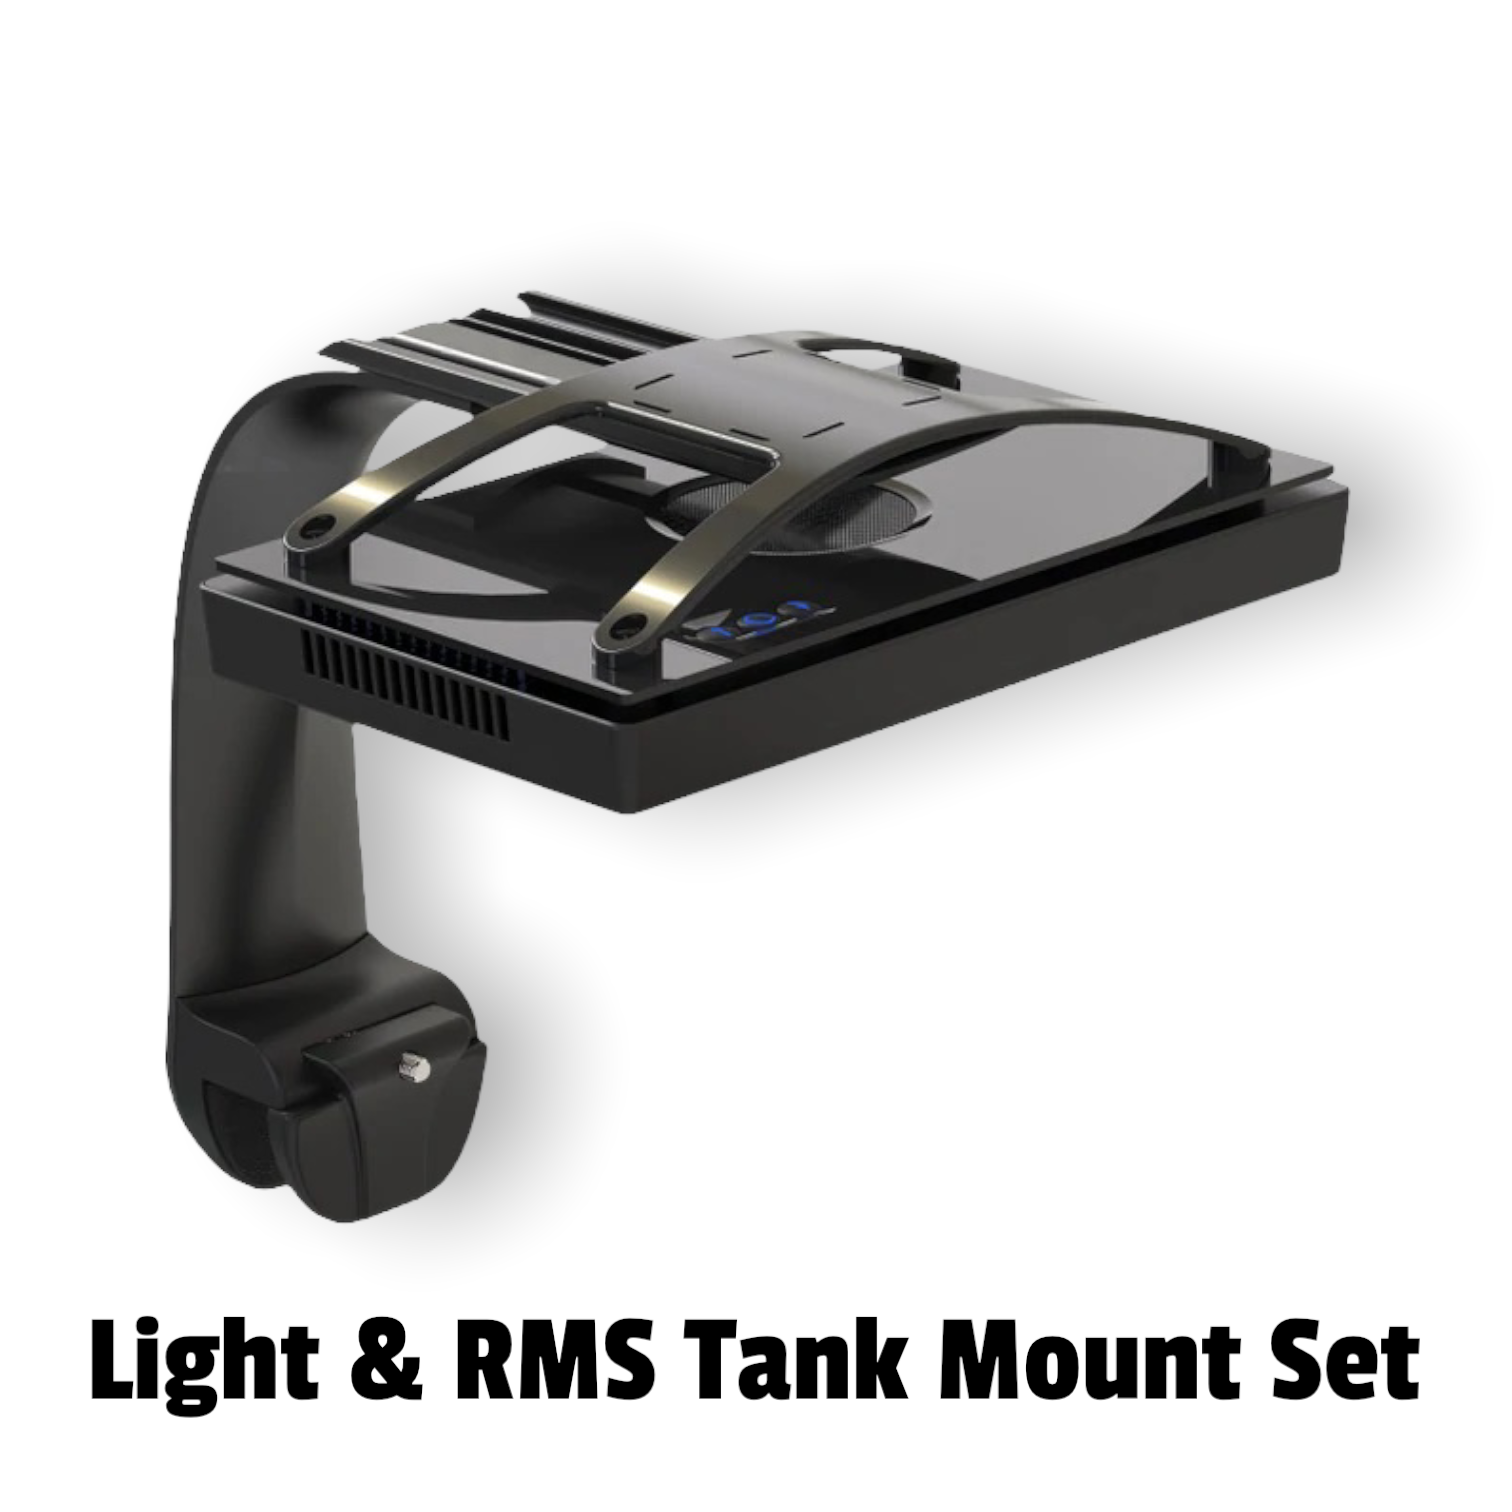 Ecotech Radion G6 XR30 Pro And RMS Tank Mount System